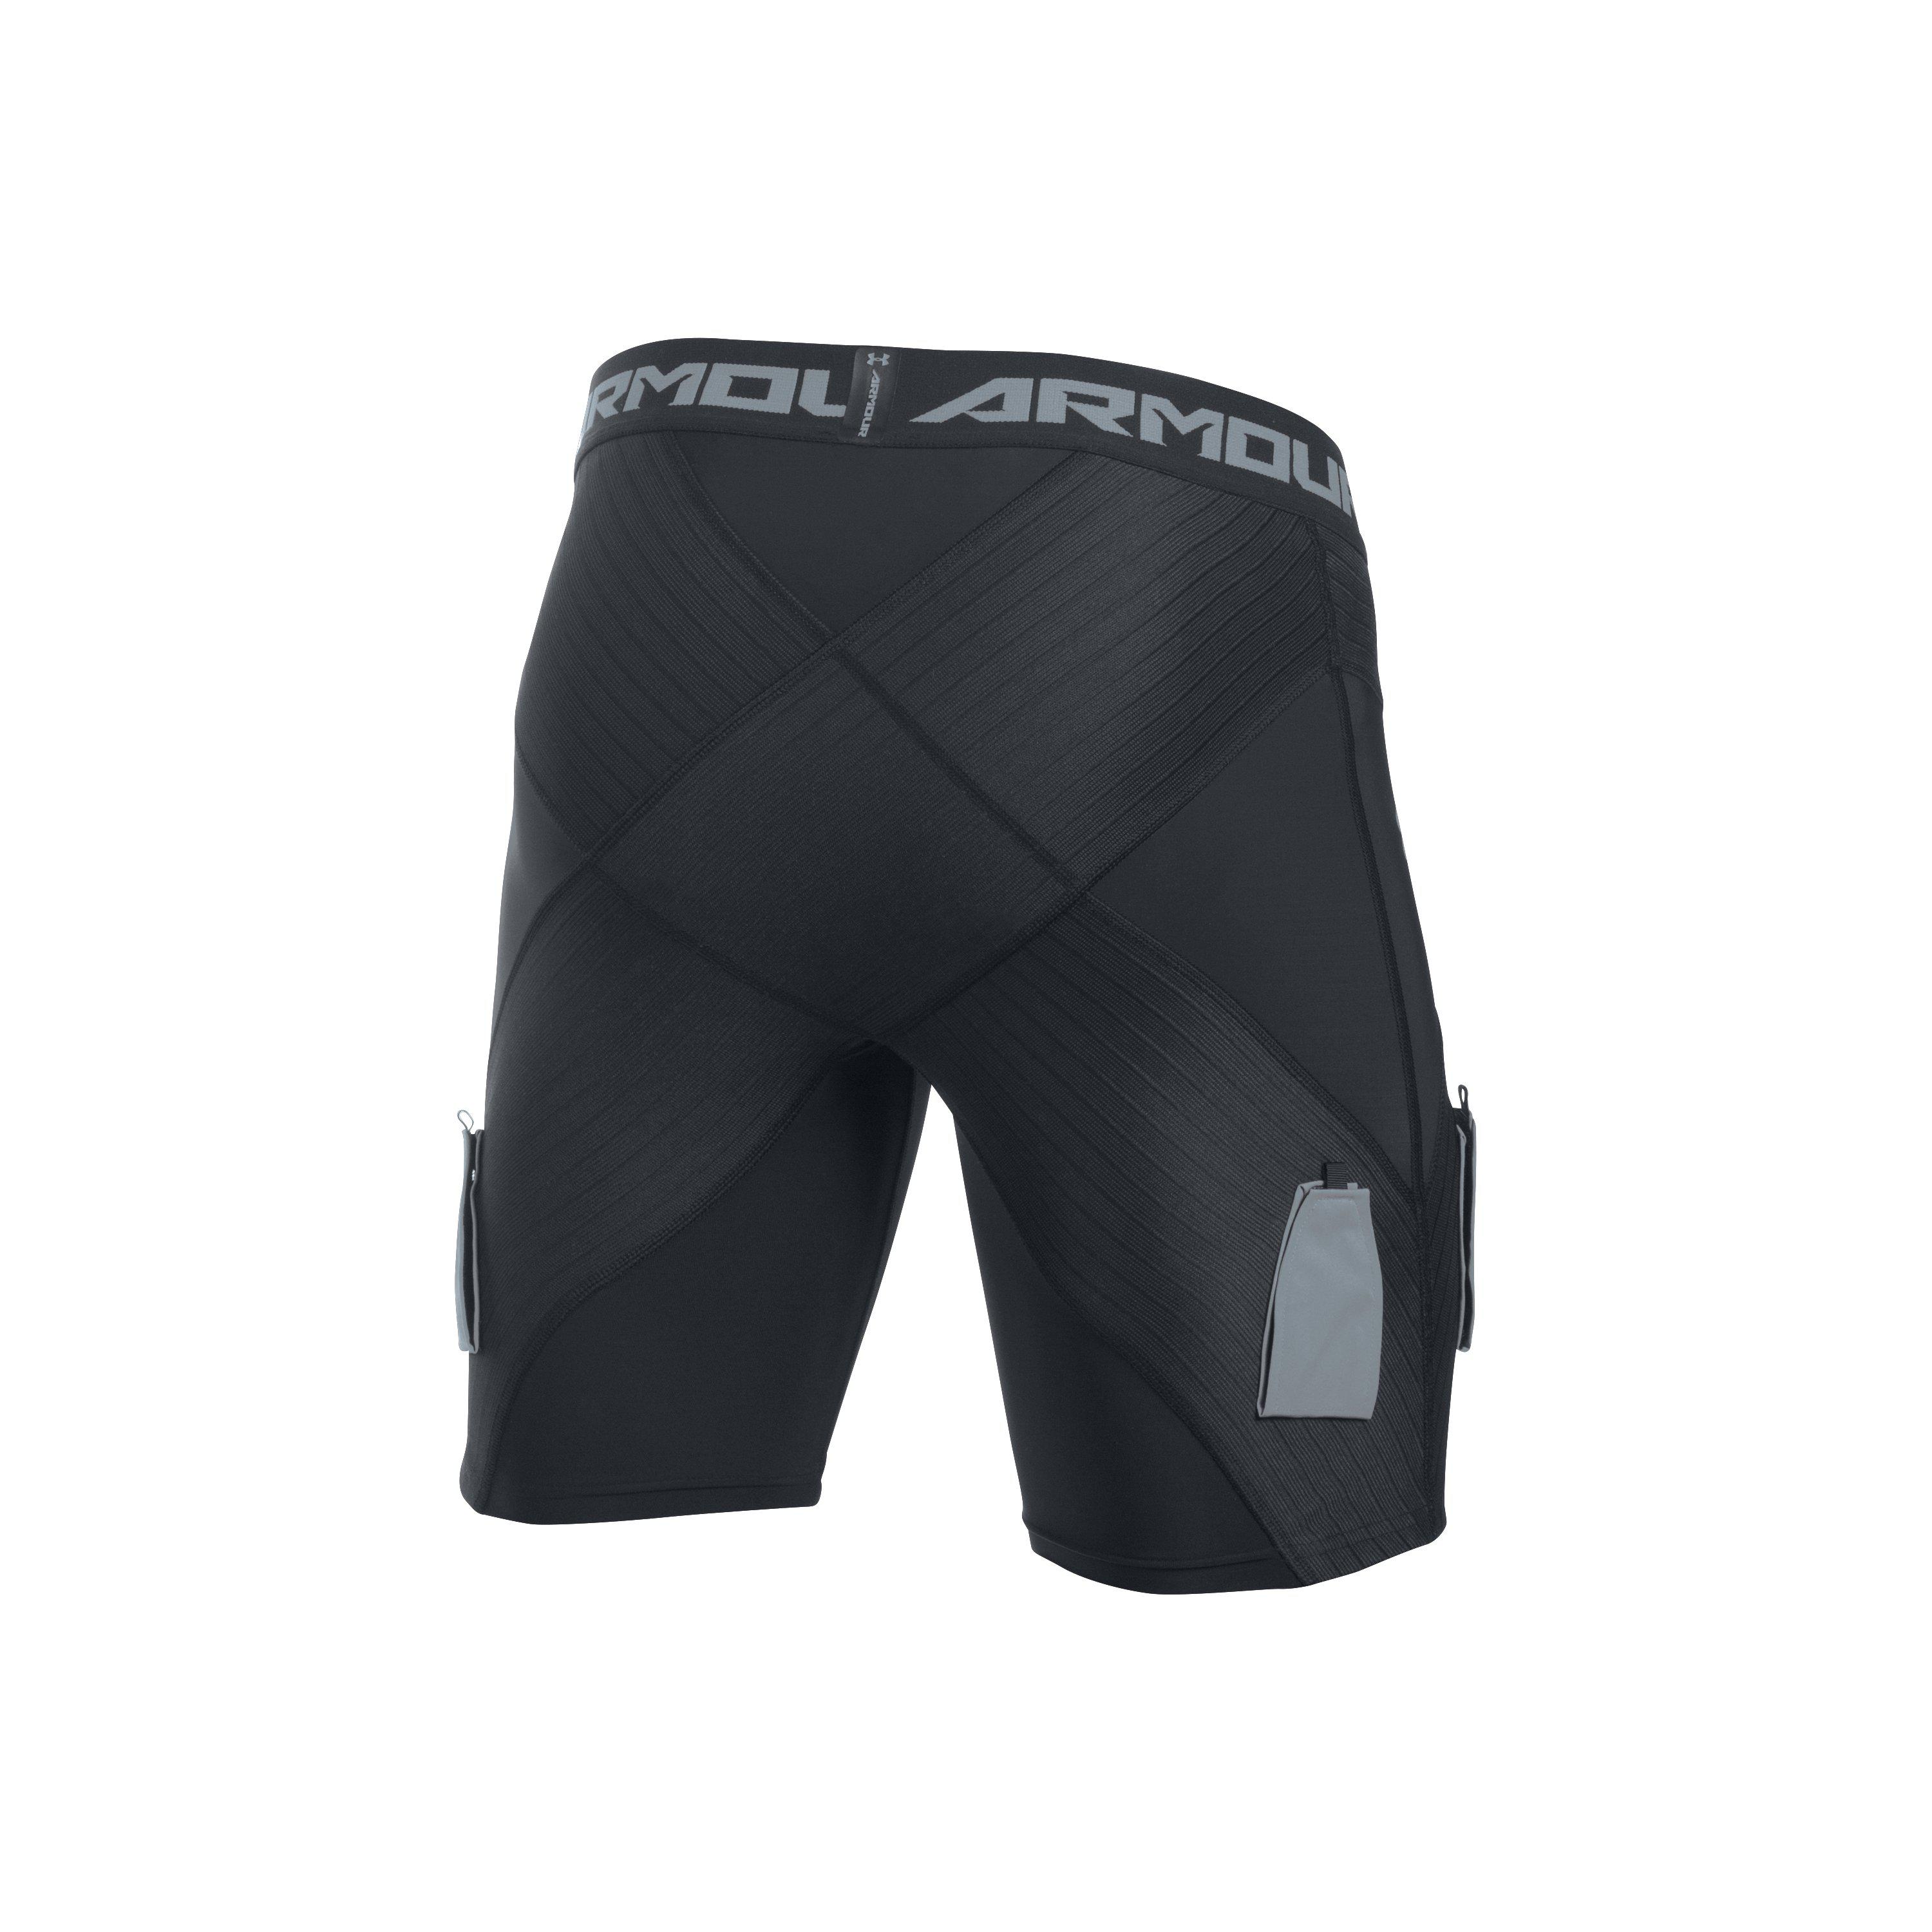 under armour hockey coreshort pro with cup